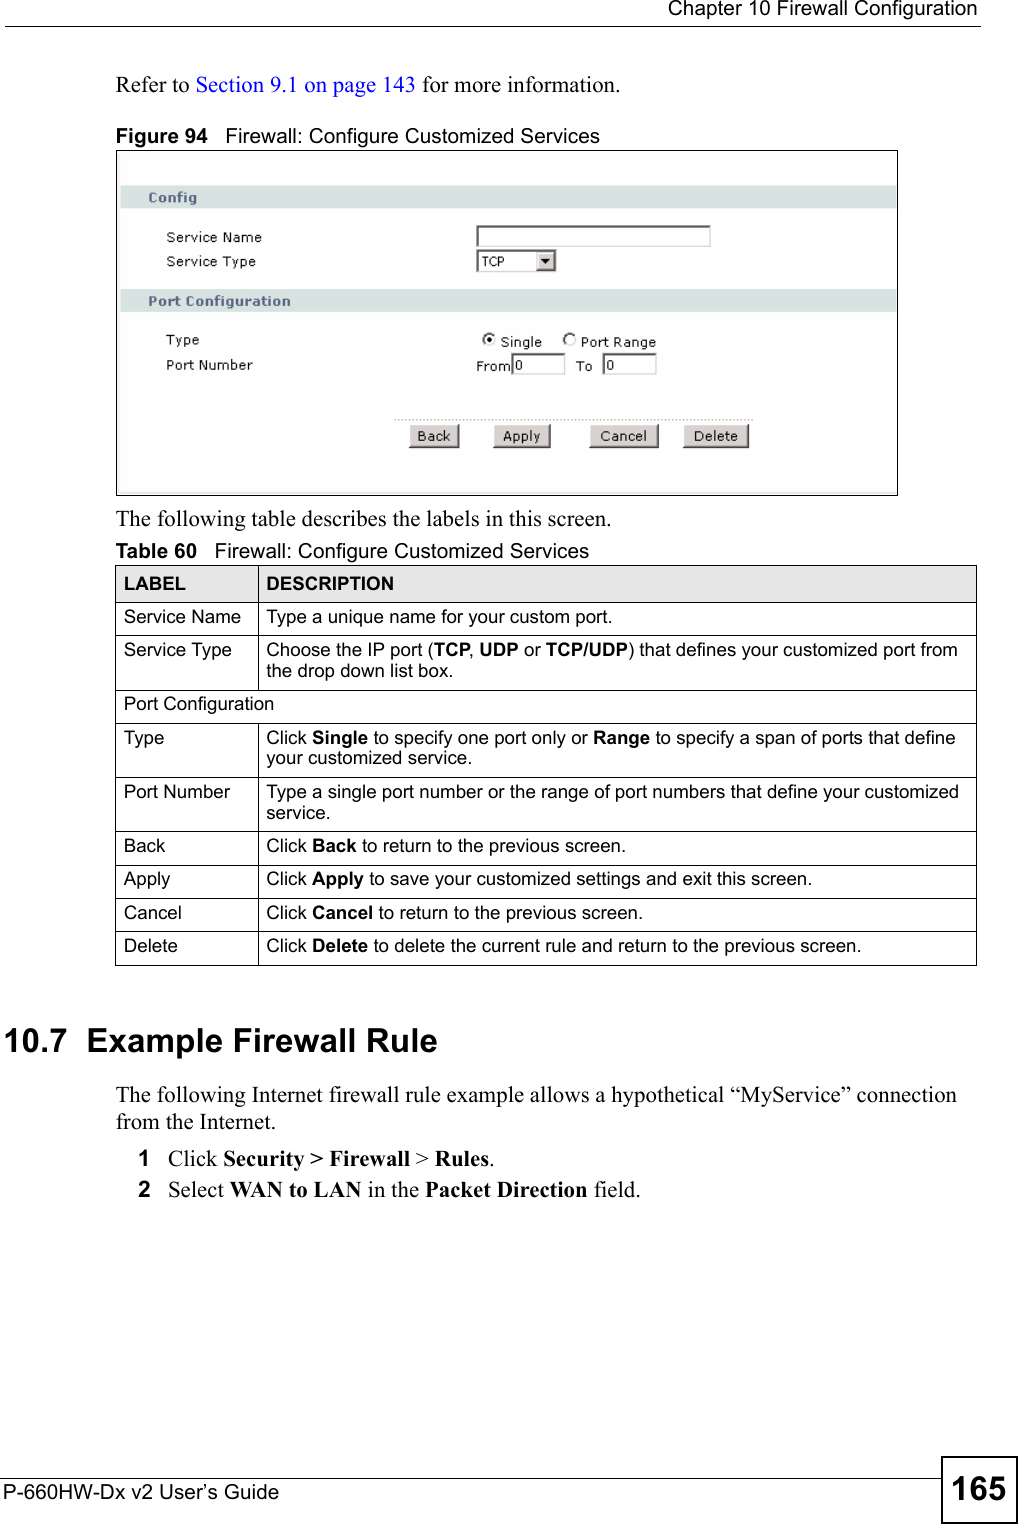  Chapter 10 Firewall ConfigurationP-660HW-Dx v2 User’s Guide 165Refer to Section 9.1 on page 143 for more information. Figure 94   Firewall: Configure Customized ServicesThe following table describes the labels in this screen.10.7  Example Firewall Rule The following Internet firewall rule example allows a hypothetical “MyService” connection from the Internet.1Click Security &gt; Firewall &gt; Rules.2Select WAN to LAN in the Packet Direction field. Table 60   Firewall: Configure Customized ServicesLABEL DESCRIPTIONService Name Type a unique name for your custom port.Service Type Choose the IP port (TCP, UDP or TCP/UDP) that defines your customized port from the drop down list box.Port ConfigurationType Click Single to specify one port only or Range to specify a span of ports that define your customized service. Port Number Type a single port number or the range of port numbers that define your customized service.Back Click Back to return to the previous screen.Apply Click Apply to save your customized settings and exit this screen.Cancel Click Cancel to return to the previous screen.Delete Click Delete to delete the current rule and return to the previous screen.